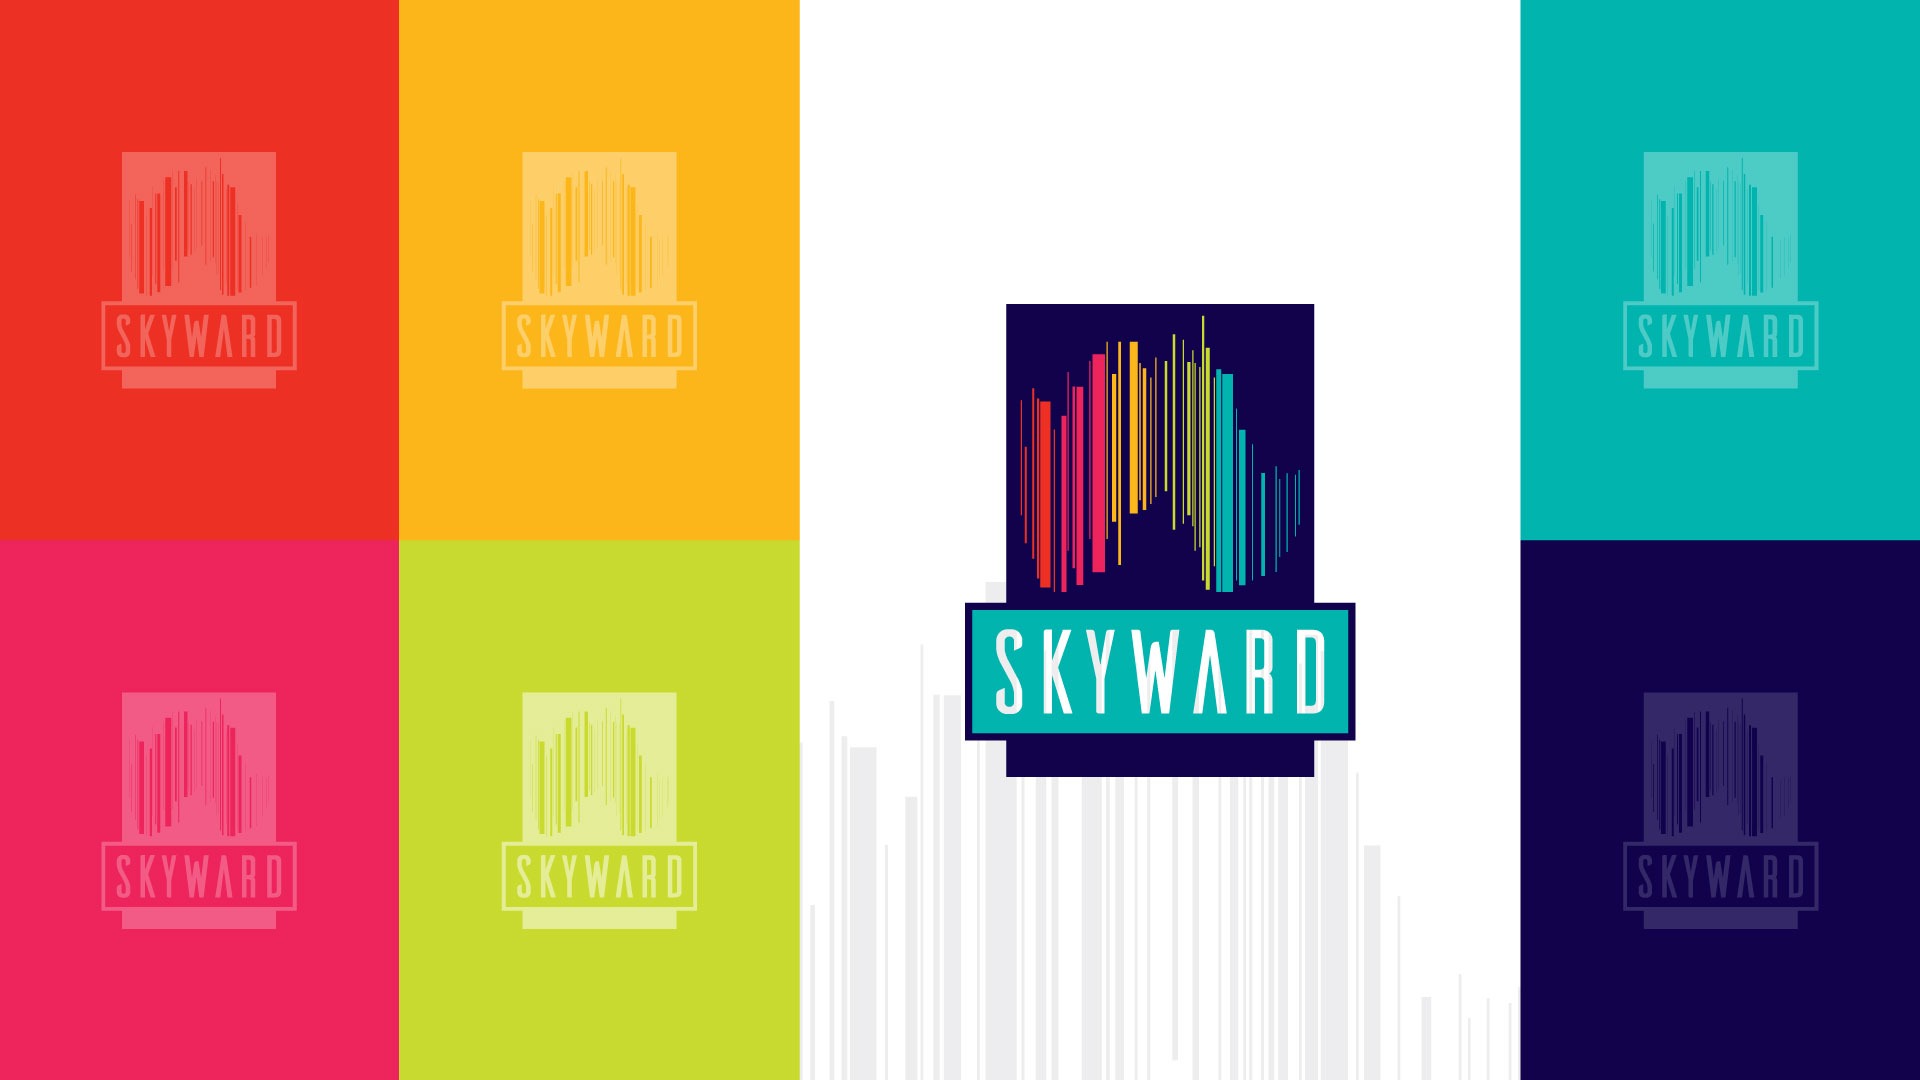 Featured image for “Skyward”